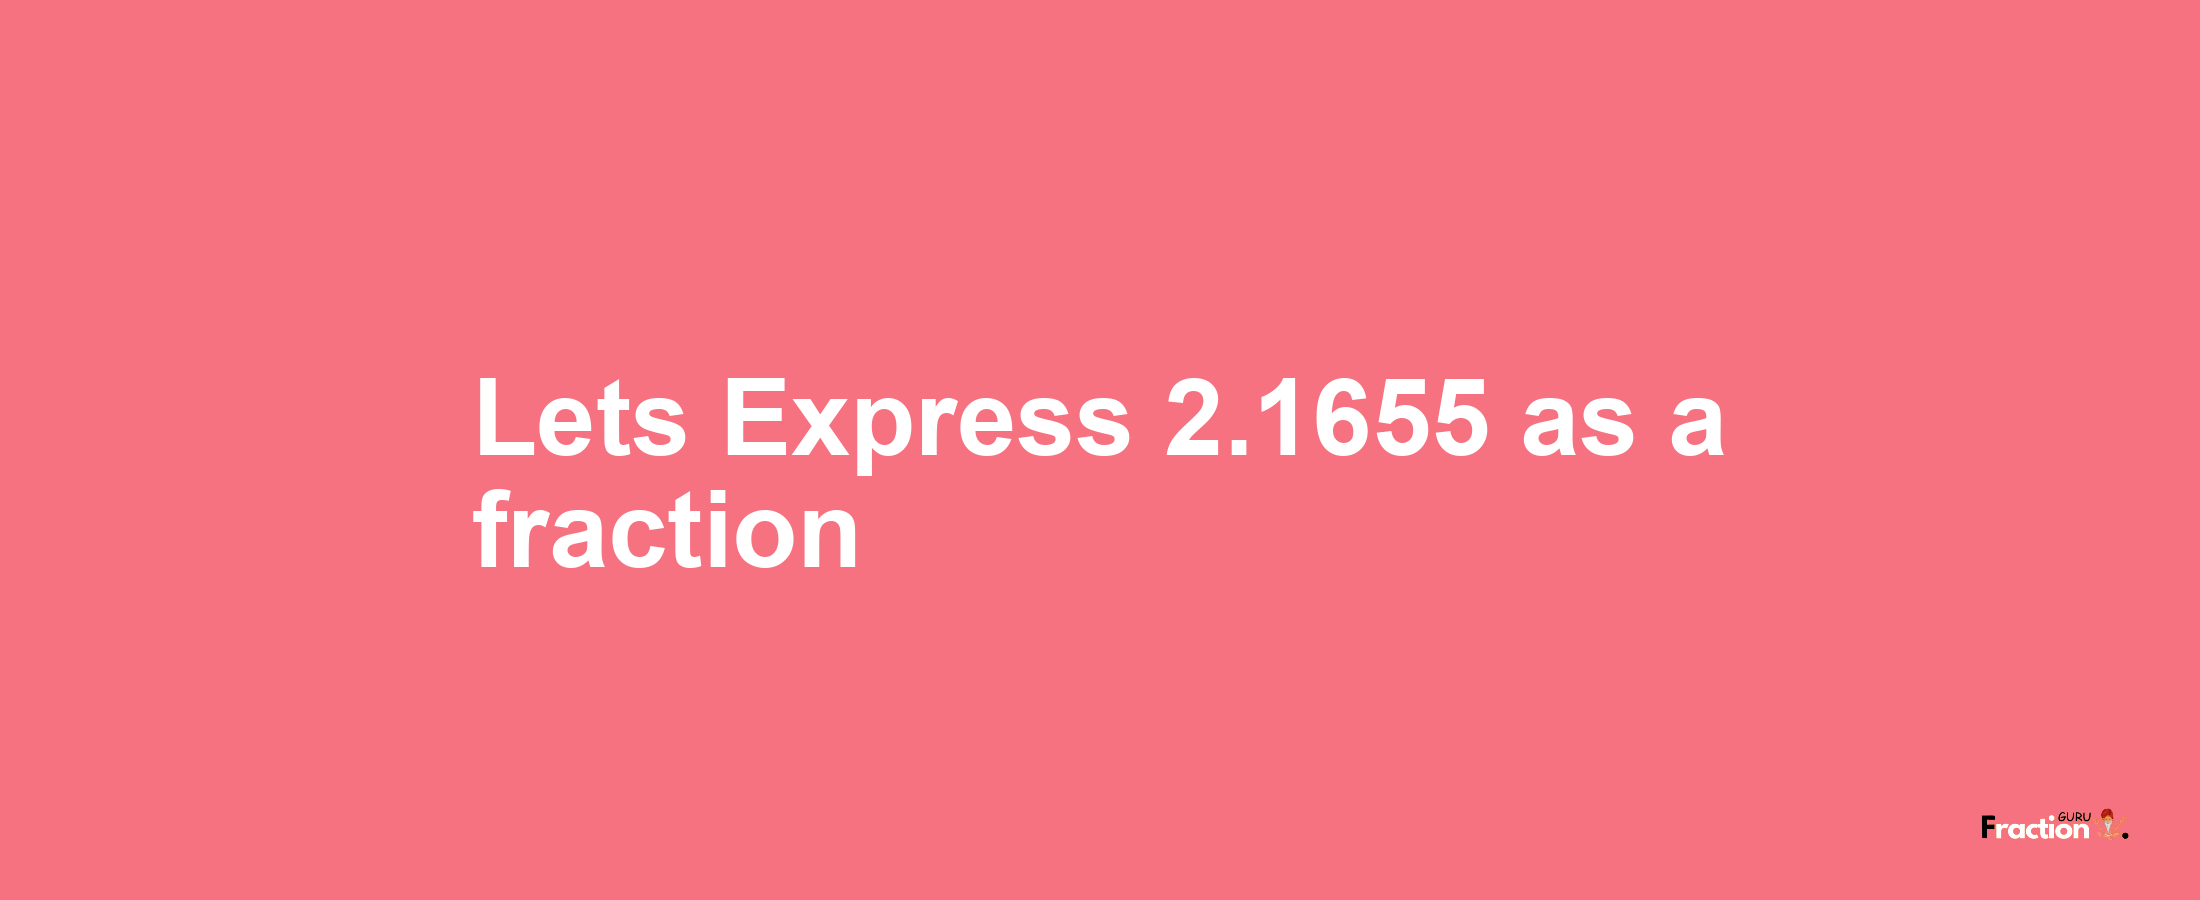 Lets Express 2.1655 as afraction